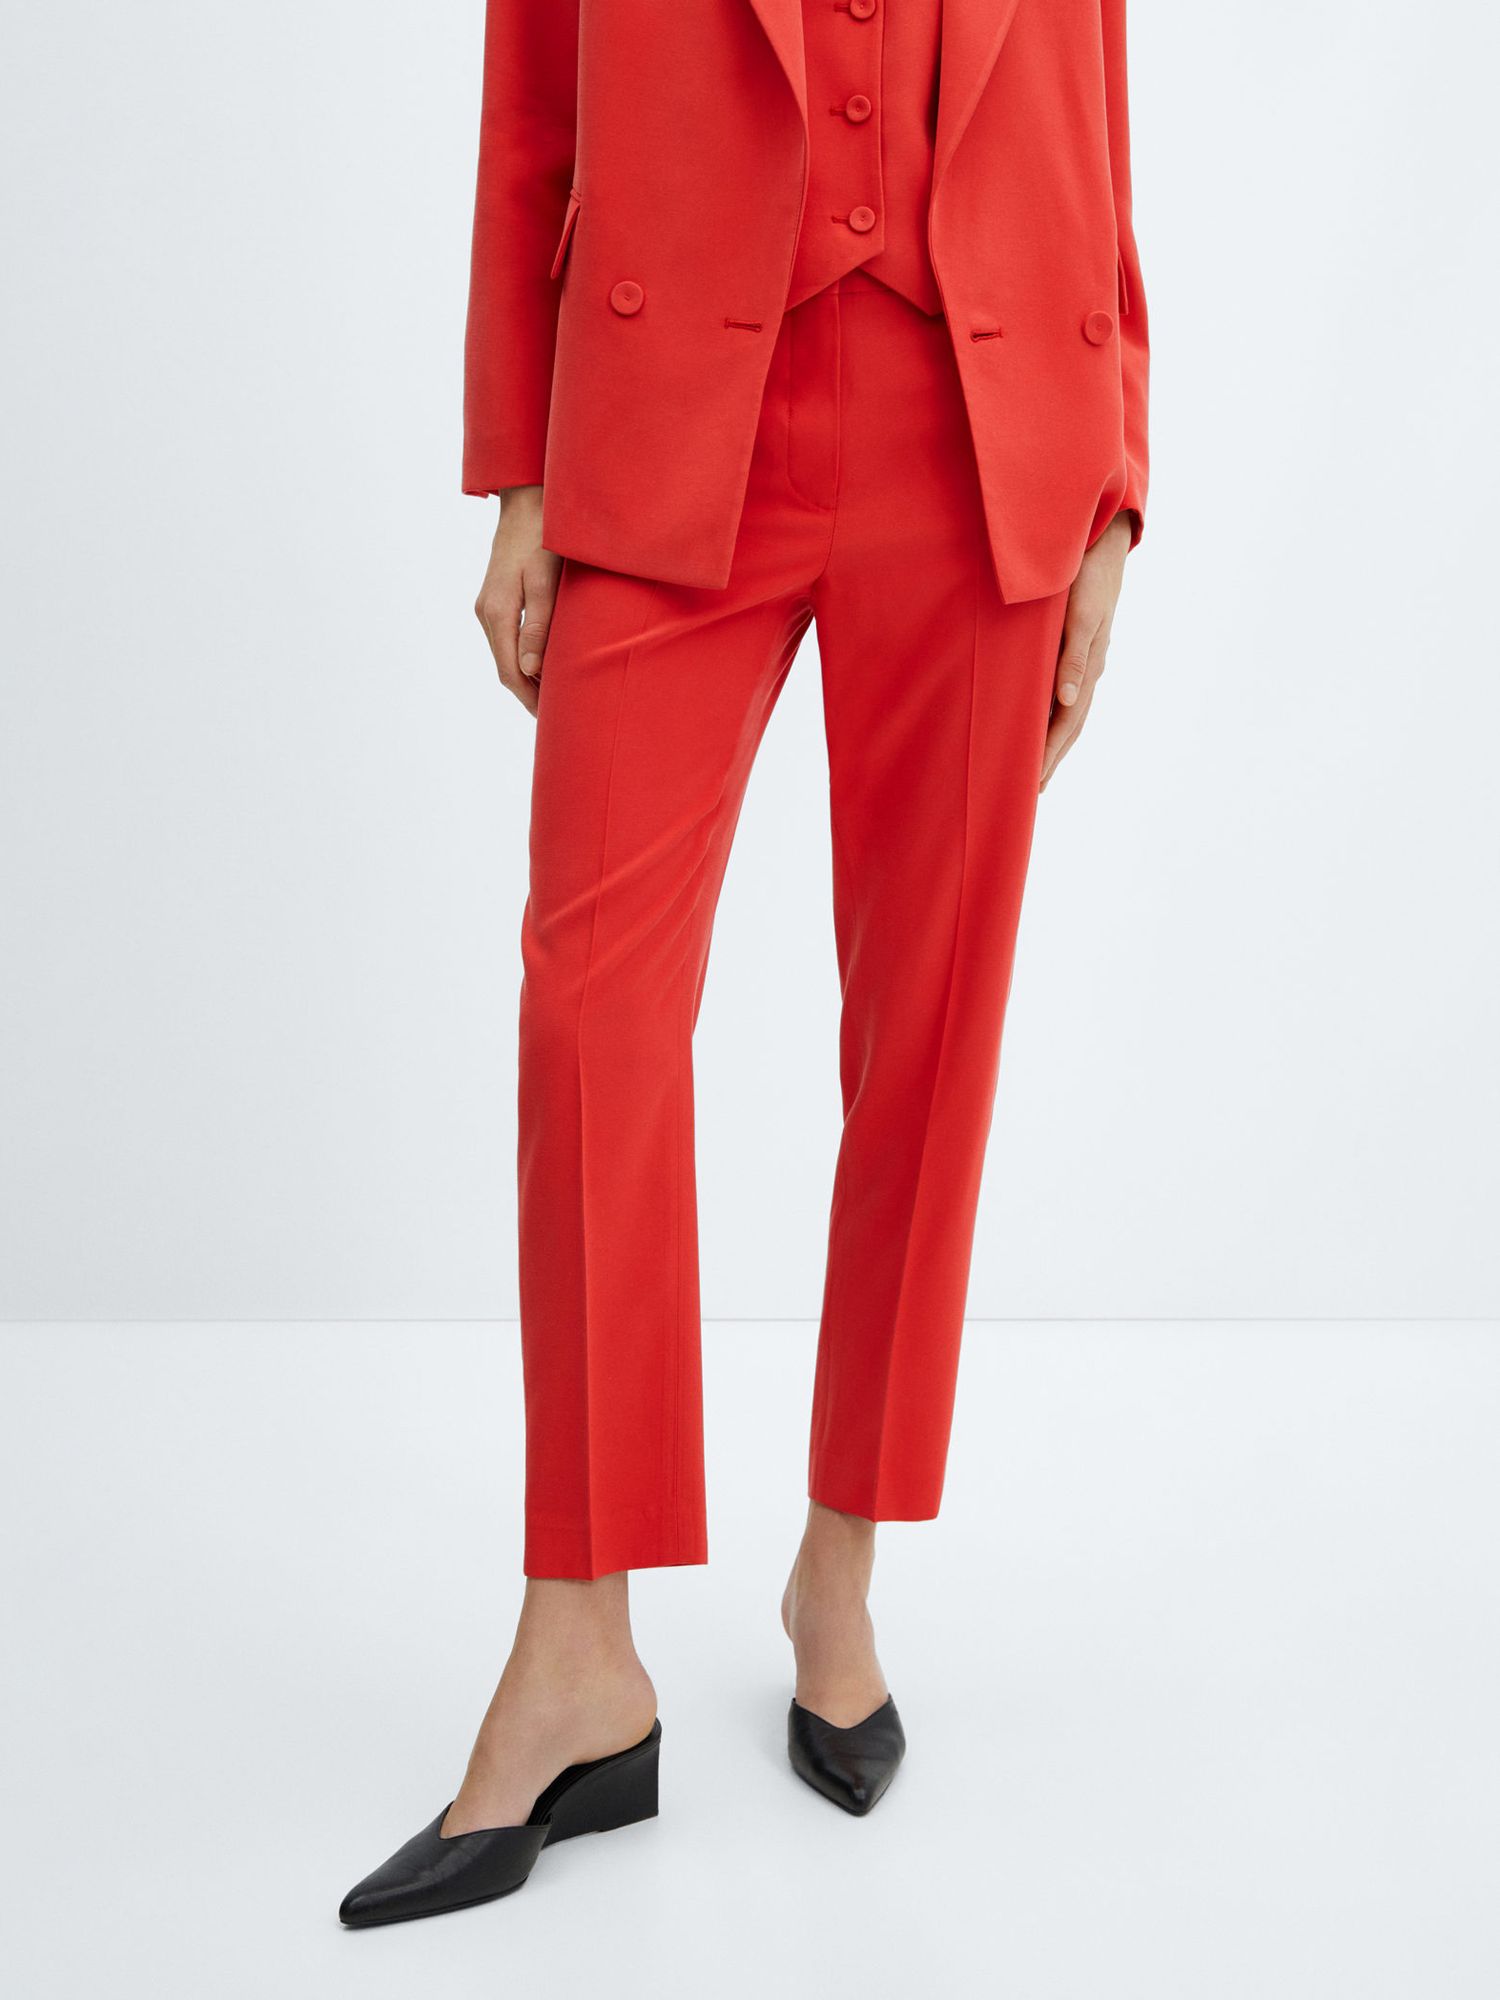 Mango Tempo Straight Suit Trousers, Bright Red, XXXXXL